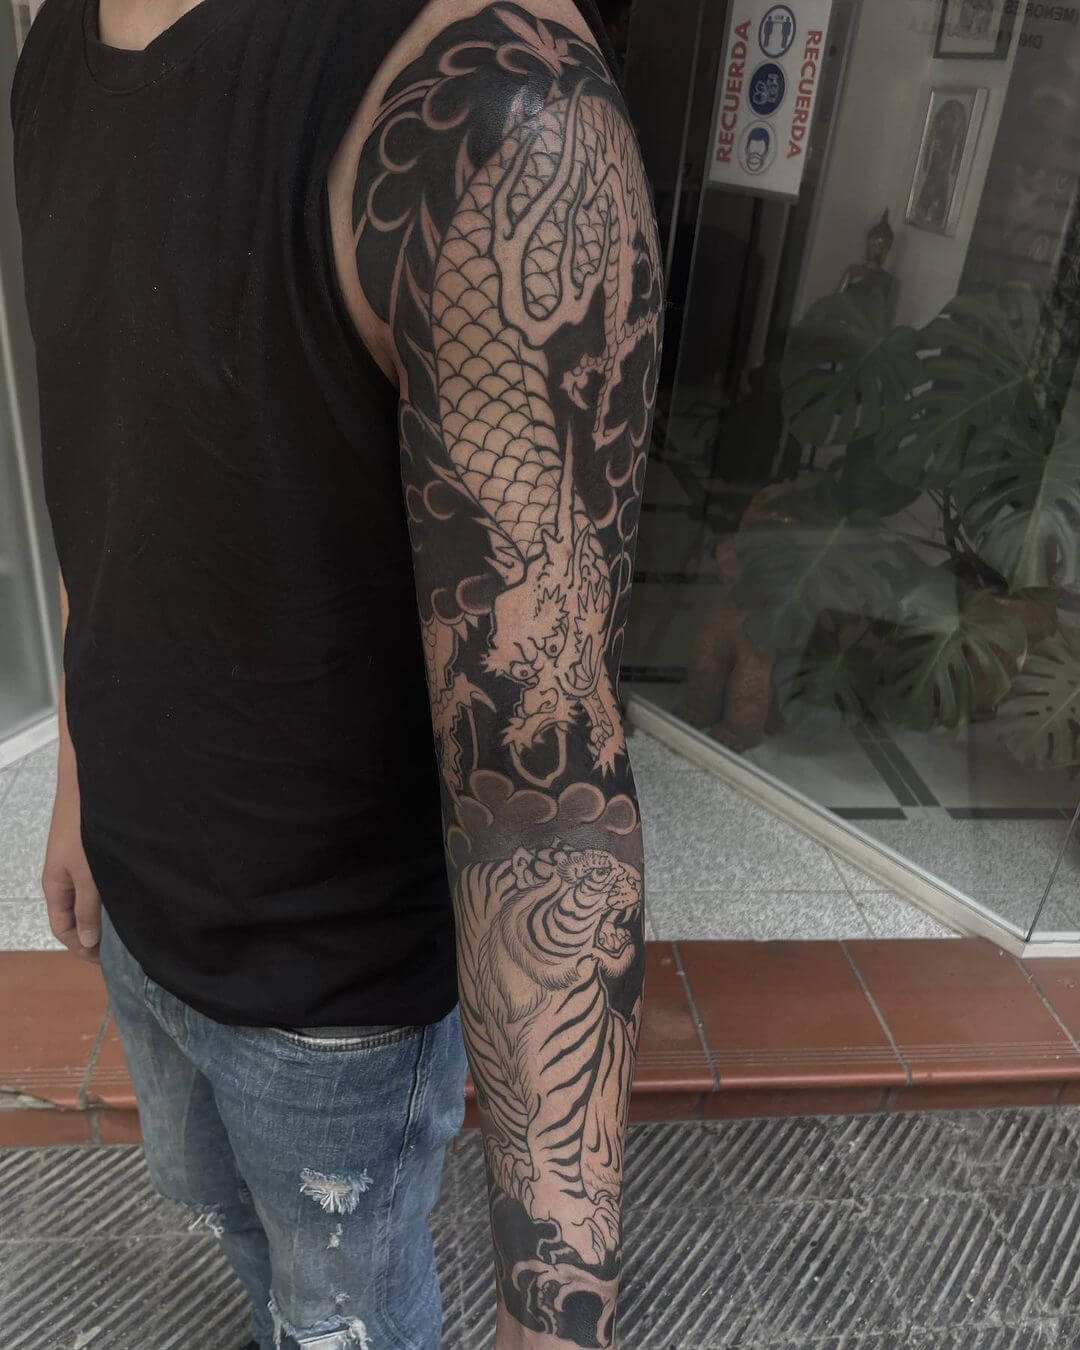 What are some popular Japanese leg sleeve tattoo designs? …